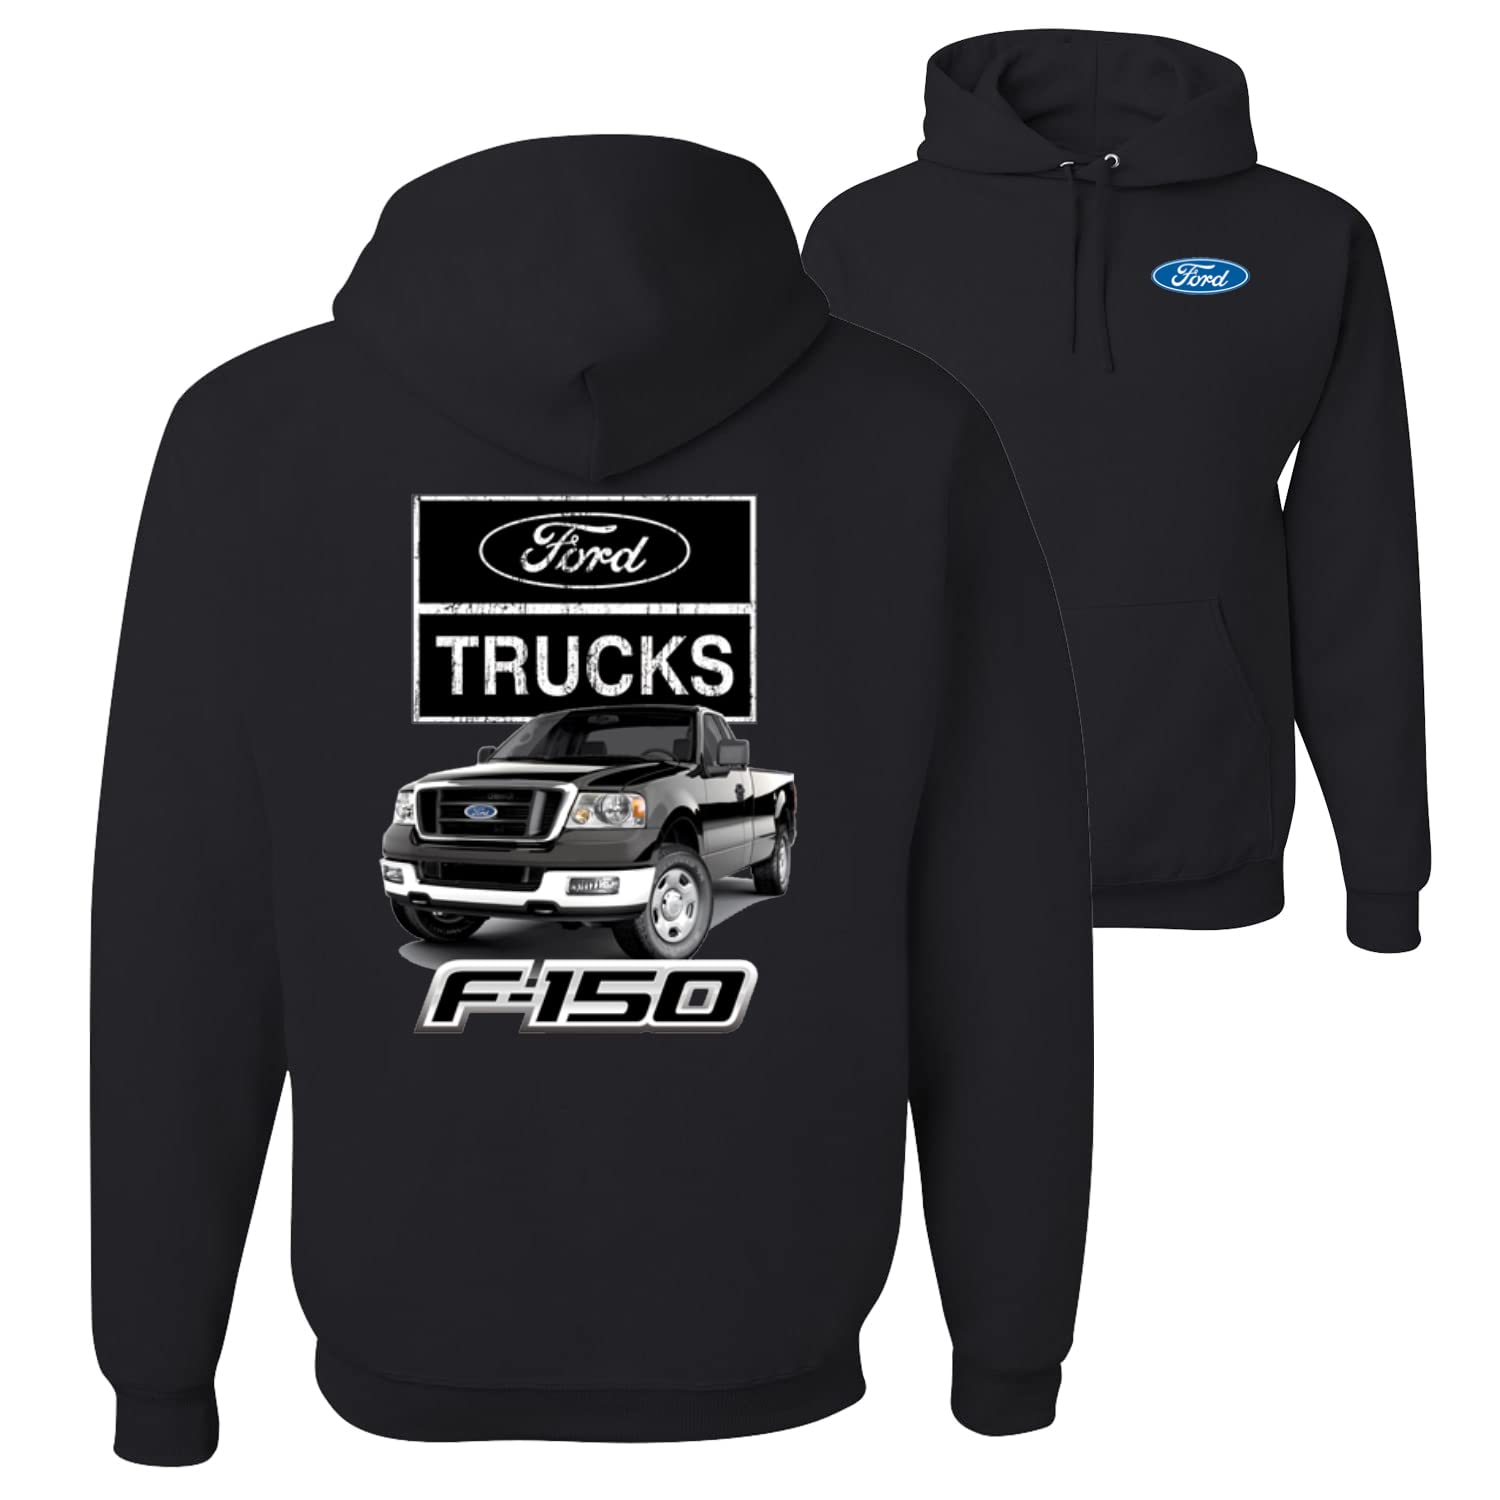 Wild Bobby Ford Trucks F150 Pickup Cars and Trucks Front and Back Unisex Graphic Hoodie Sweatshirt, Black, X-Large